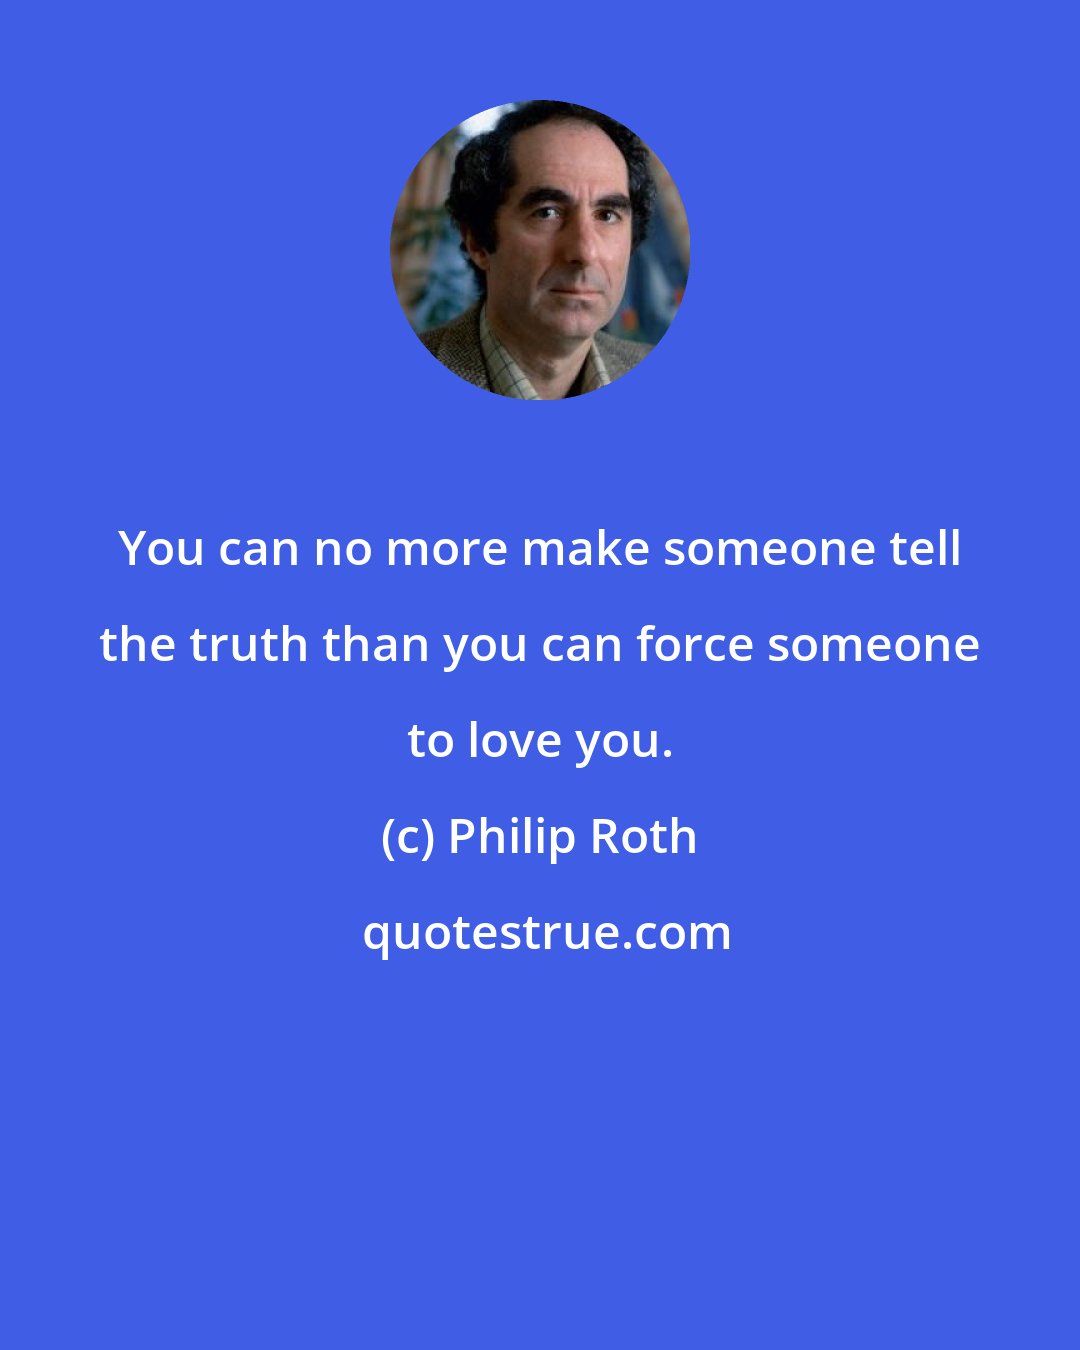 Philip Roth: You can no more make someone tell the truth than you can force someone to love you.